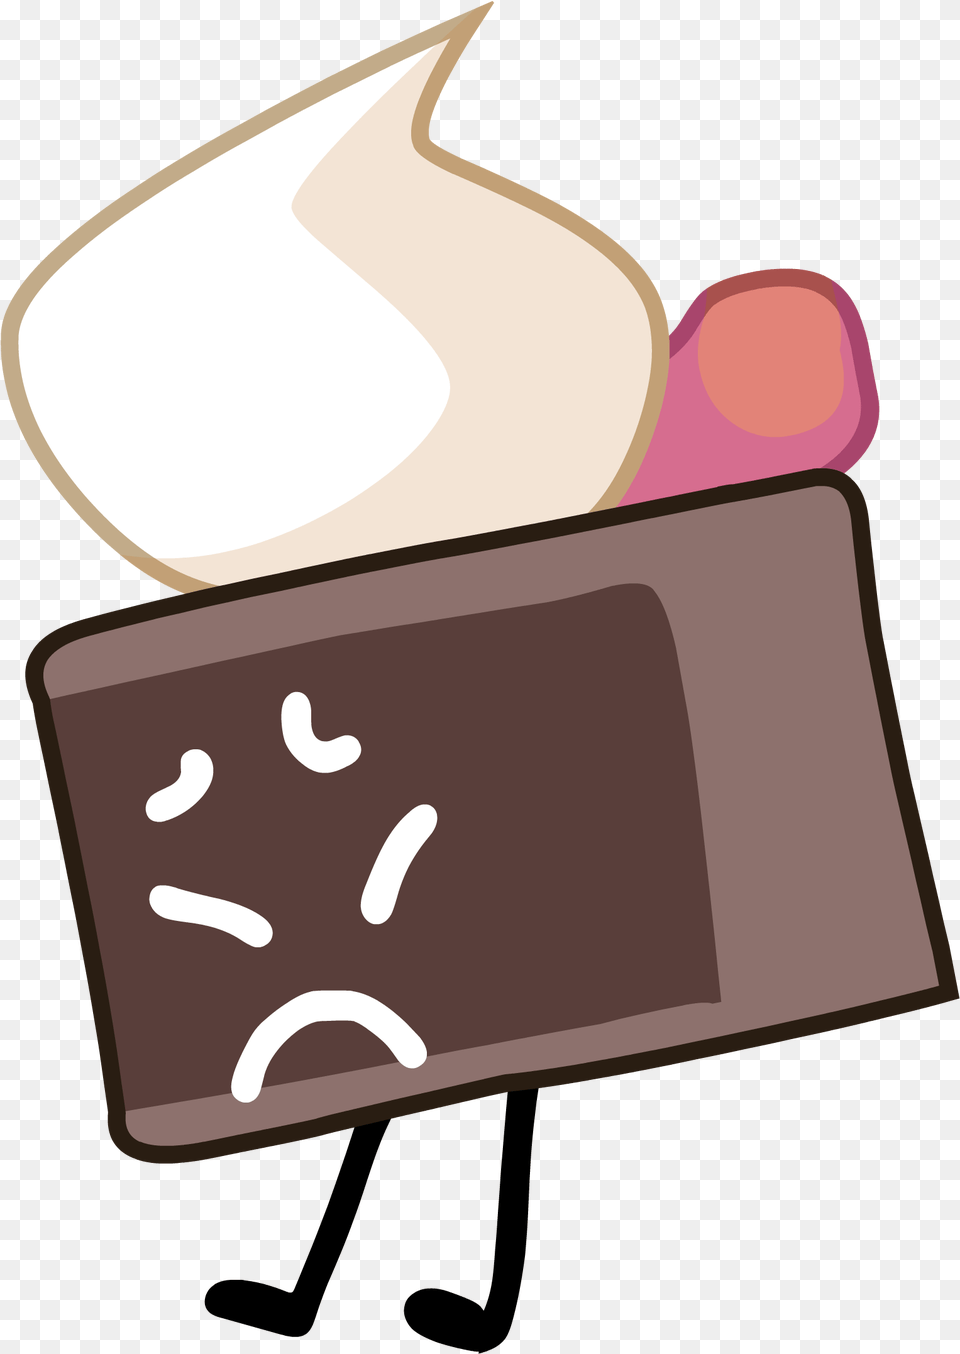 Image Loser Cake Battle For Dream Bfb The Losers Cake, Blackboard Free Png